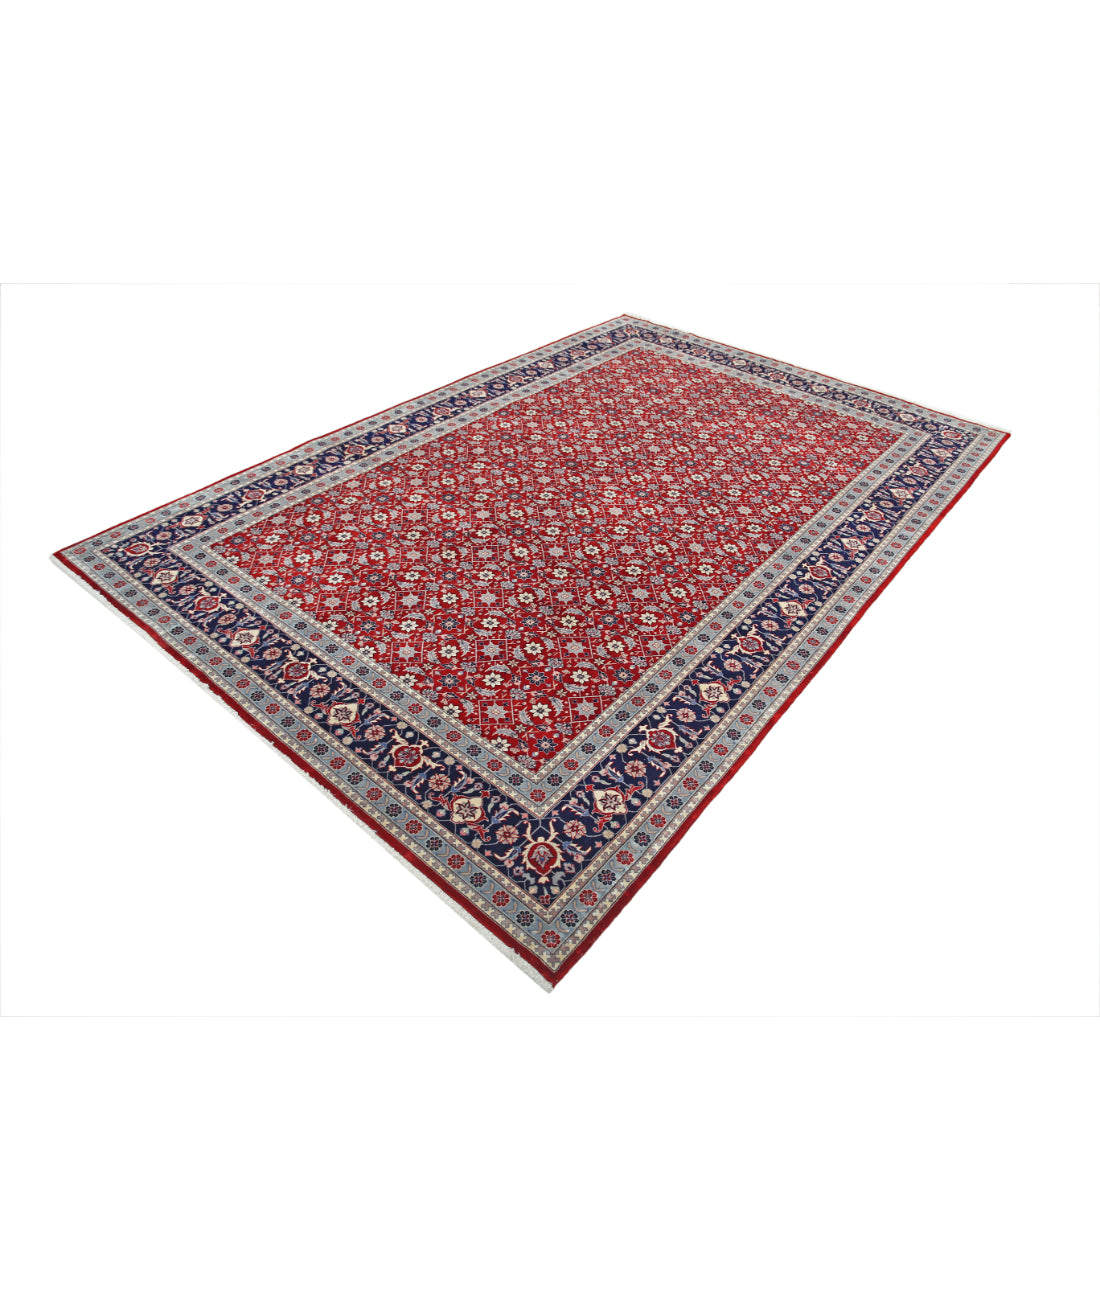 Heritage 6' 7" X 9' 10" Hand-Knotted Wool Rug 6' 7" X 9' 10" (201 X 300) / Red / Blue